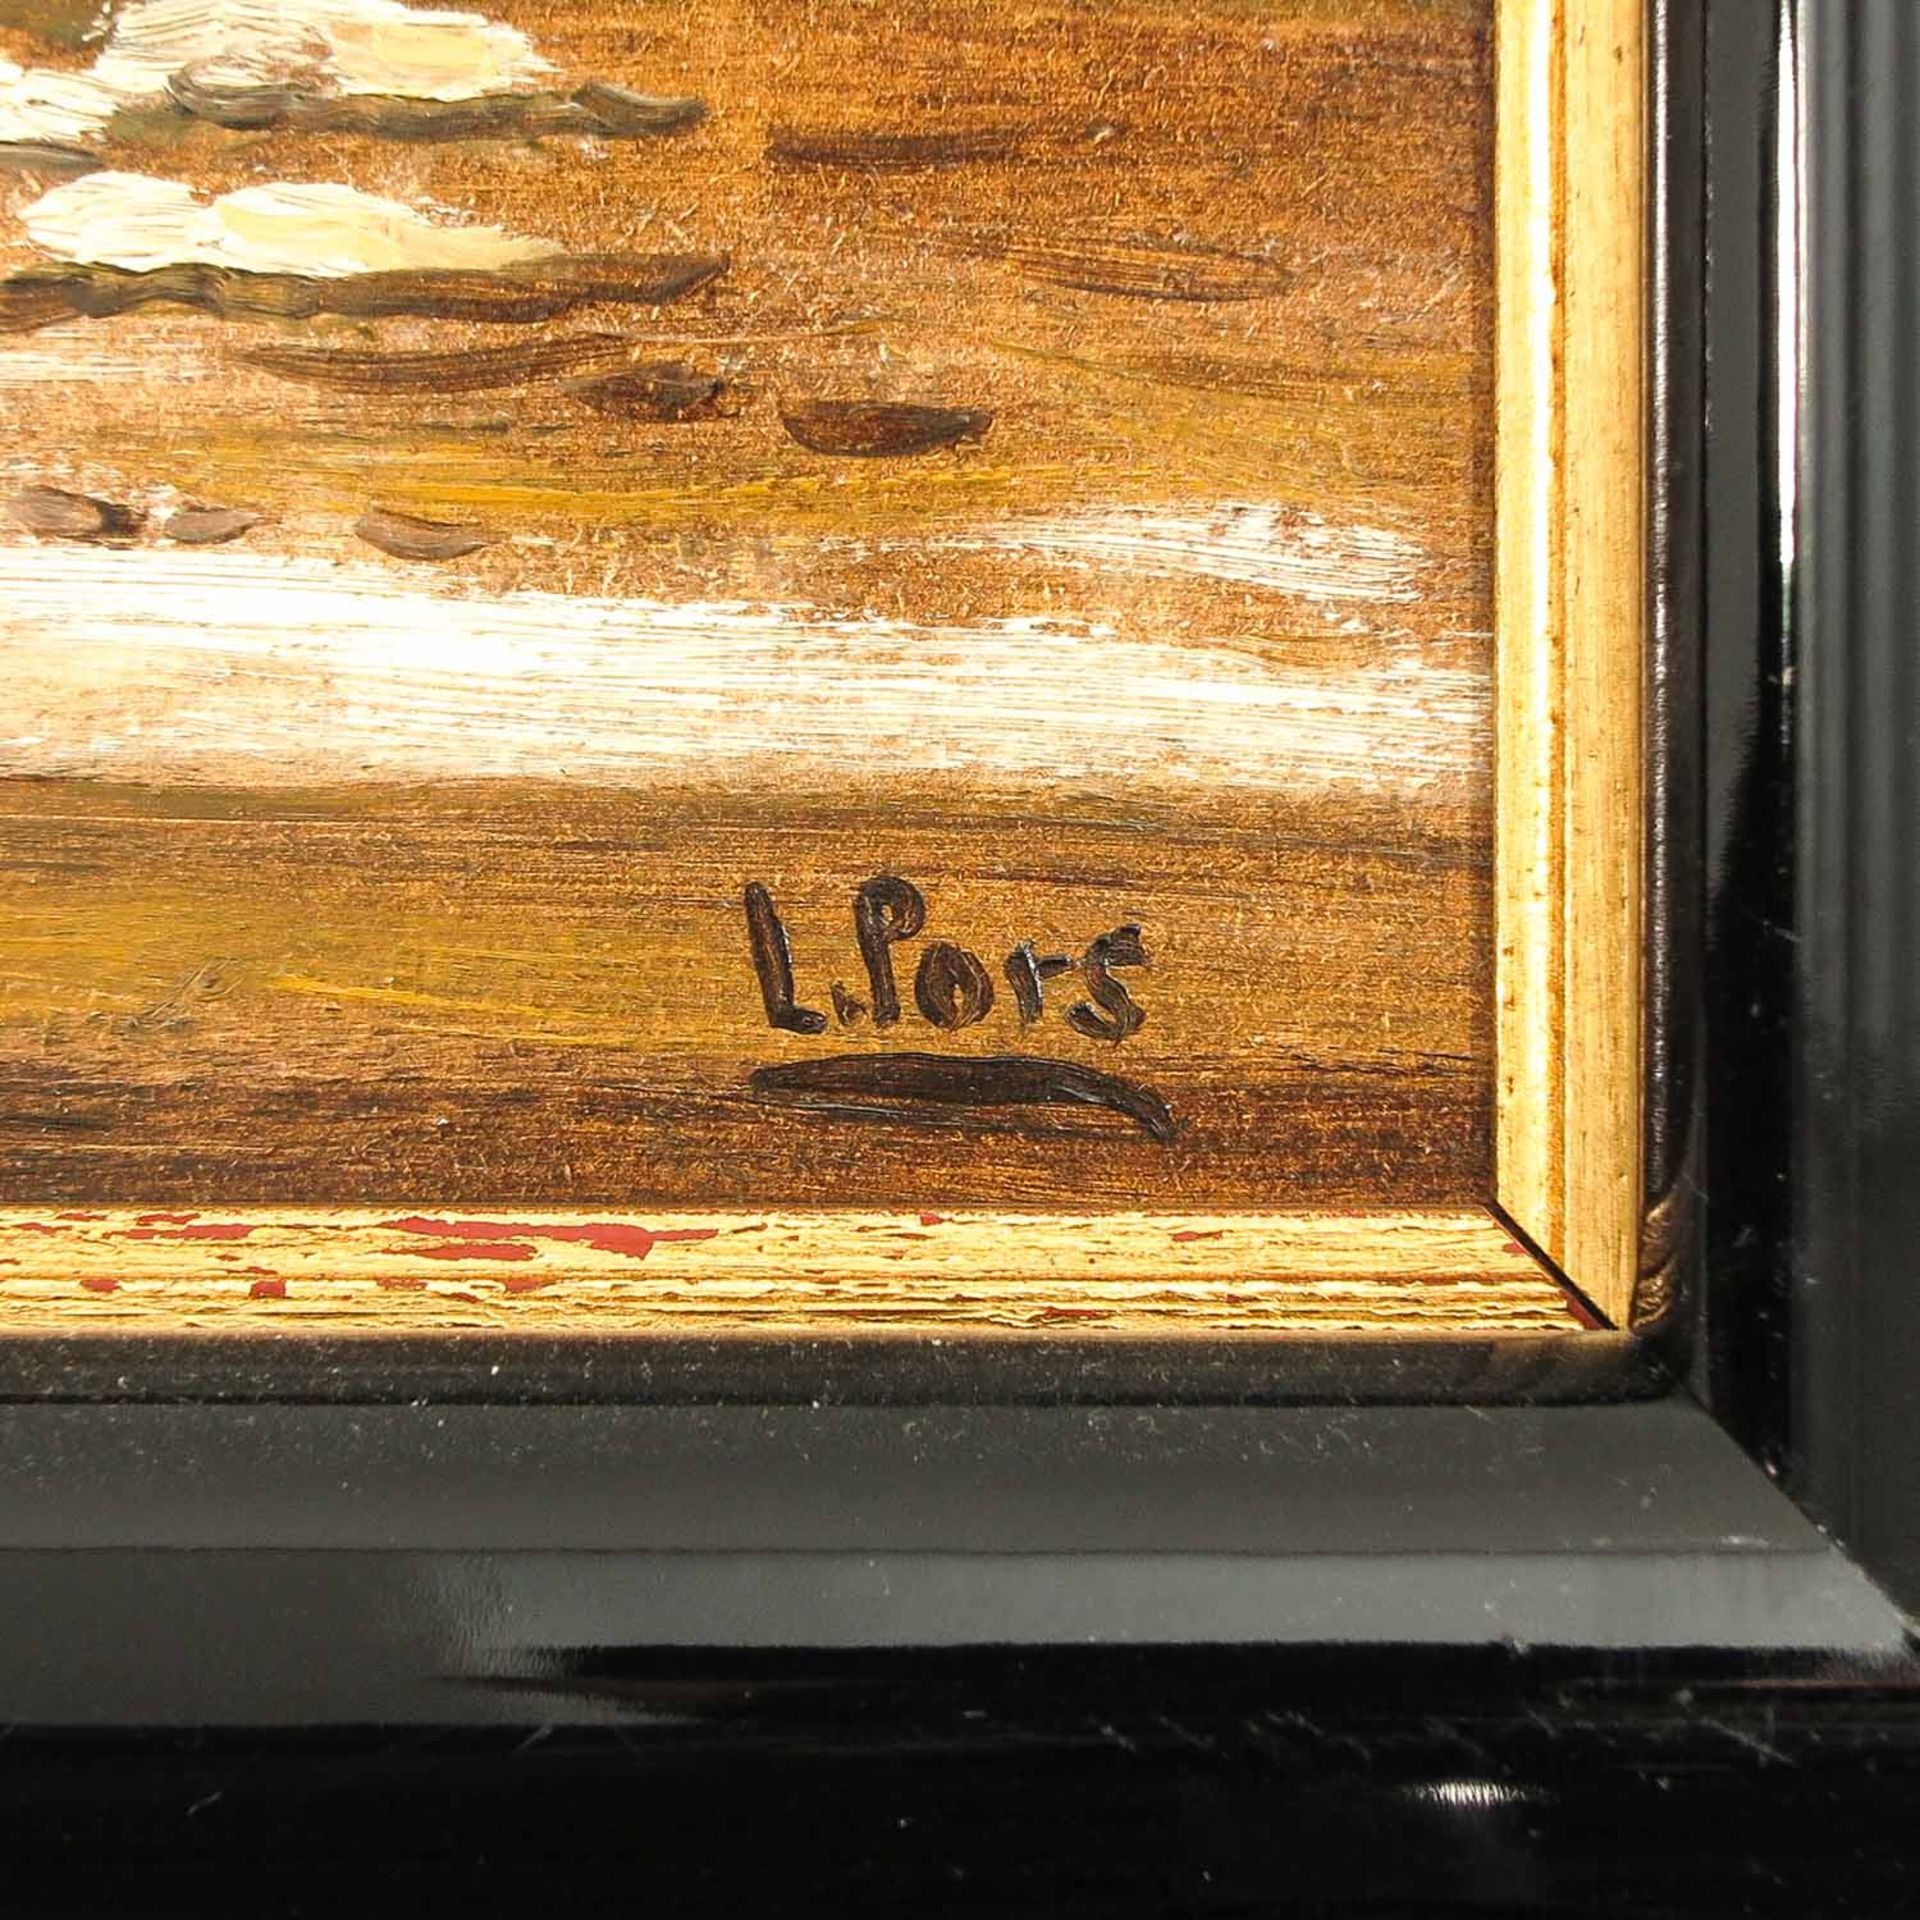 An Oil on Panel Signed L Pors - Image 3 of 4